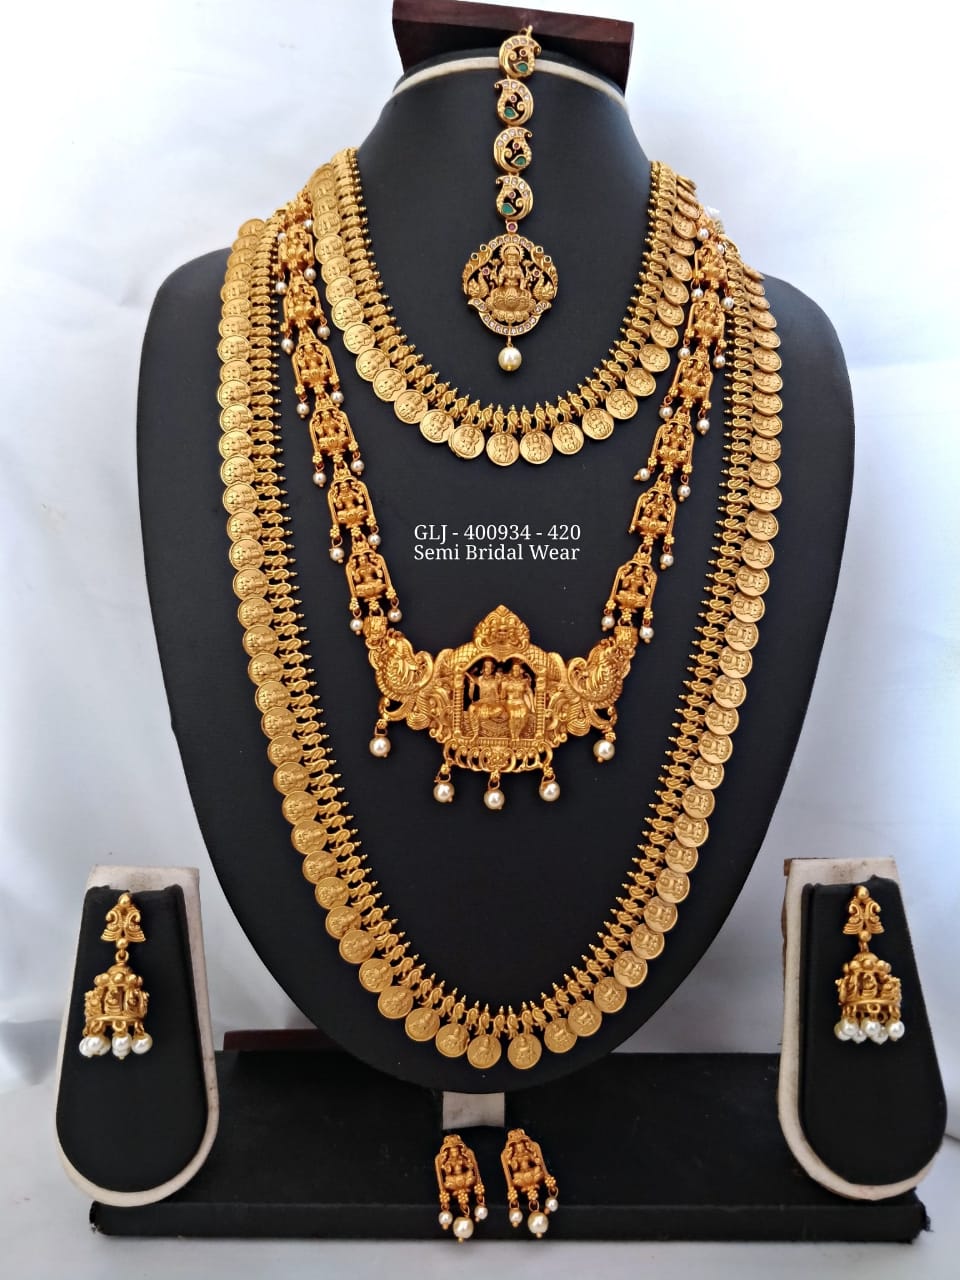 Semi Bridal Jewelery Collection - Indian Jewelry Designs